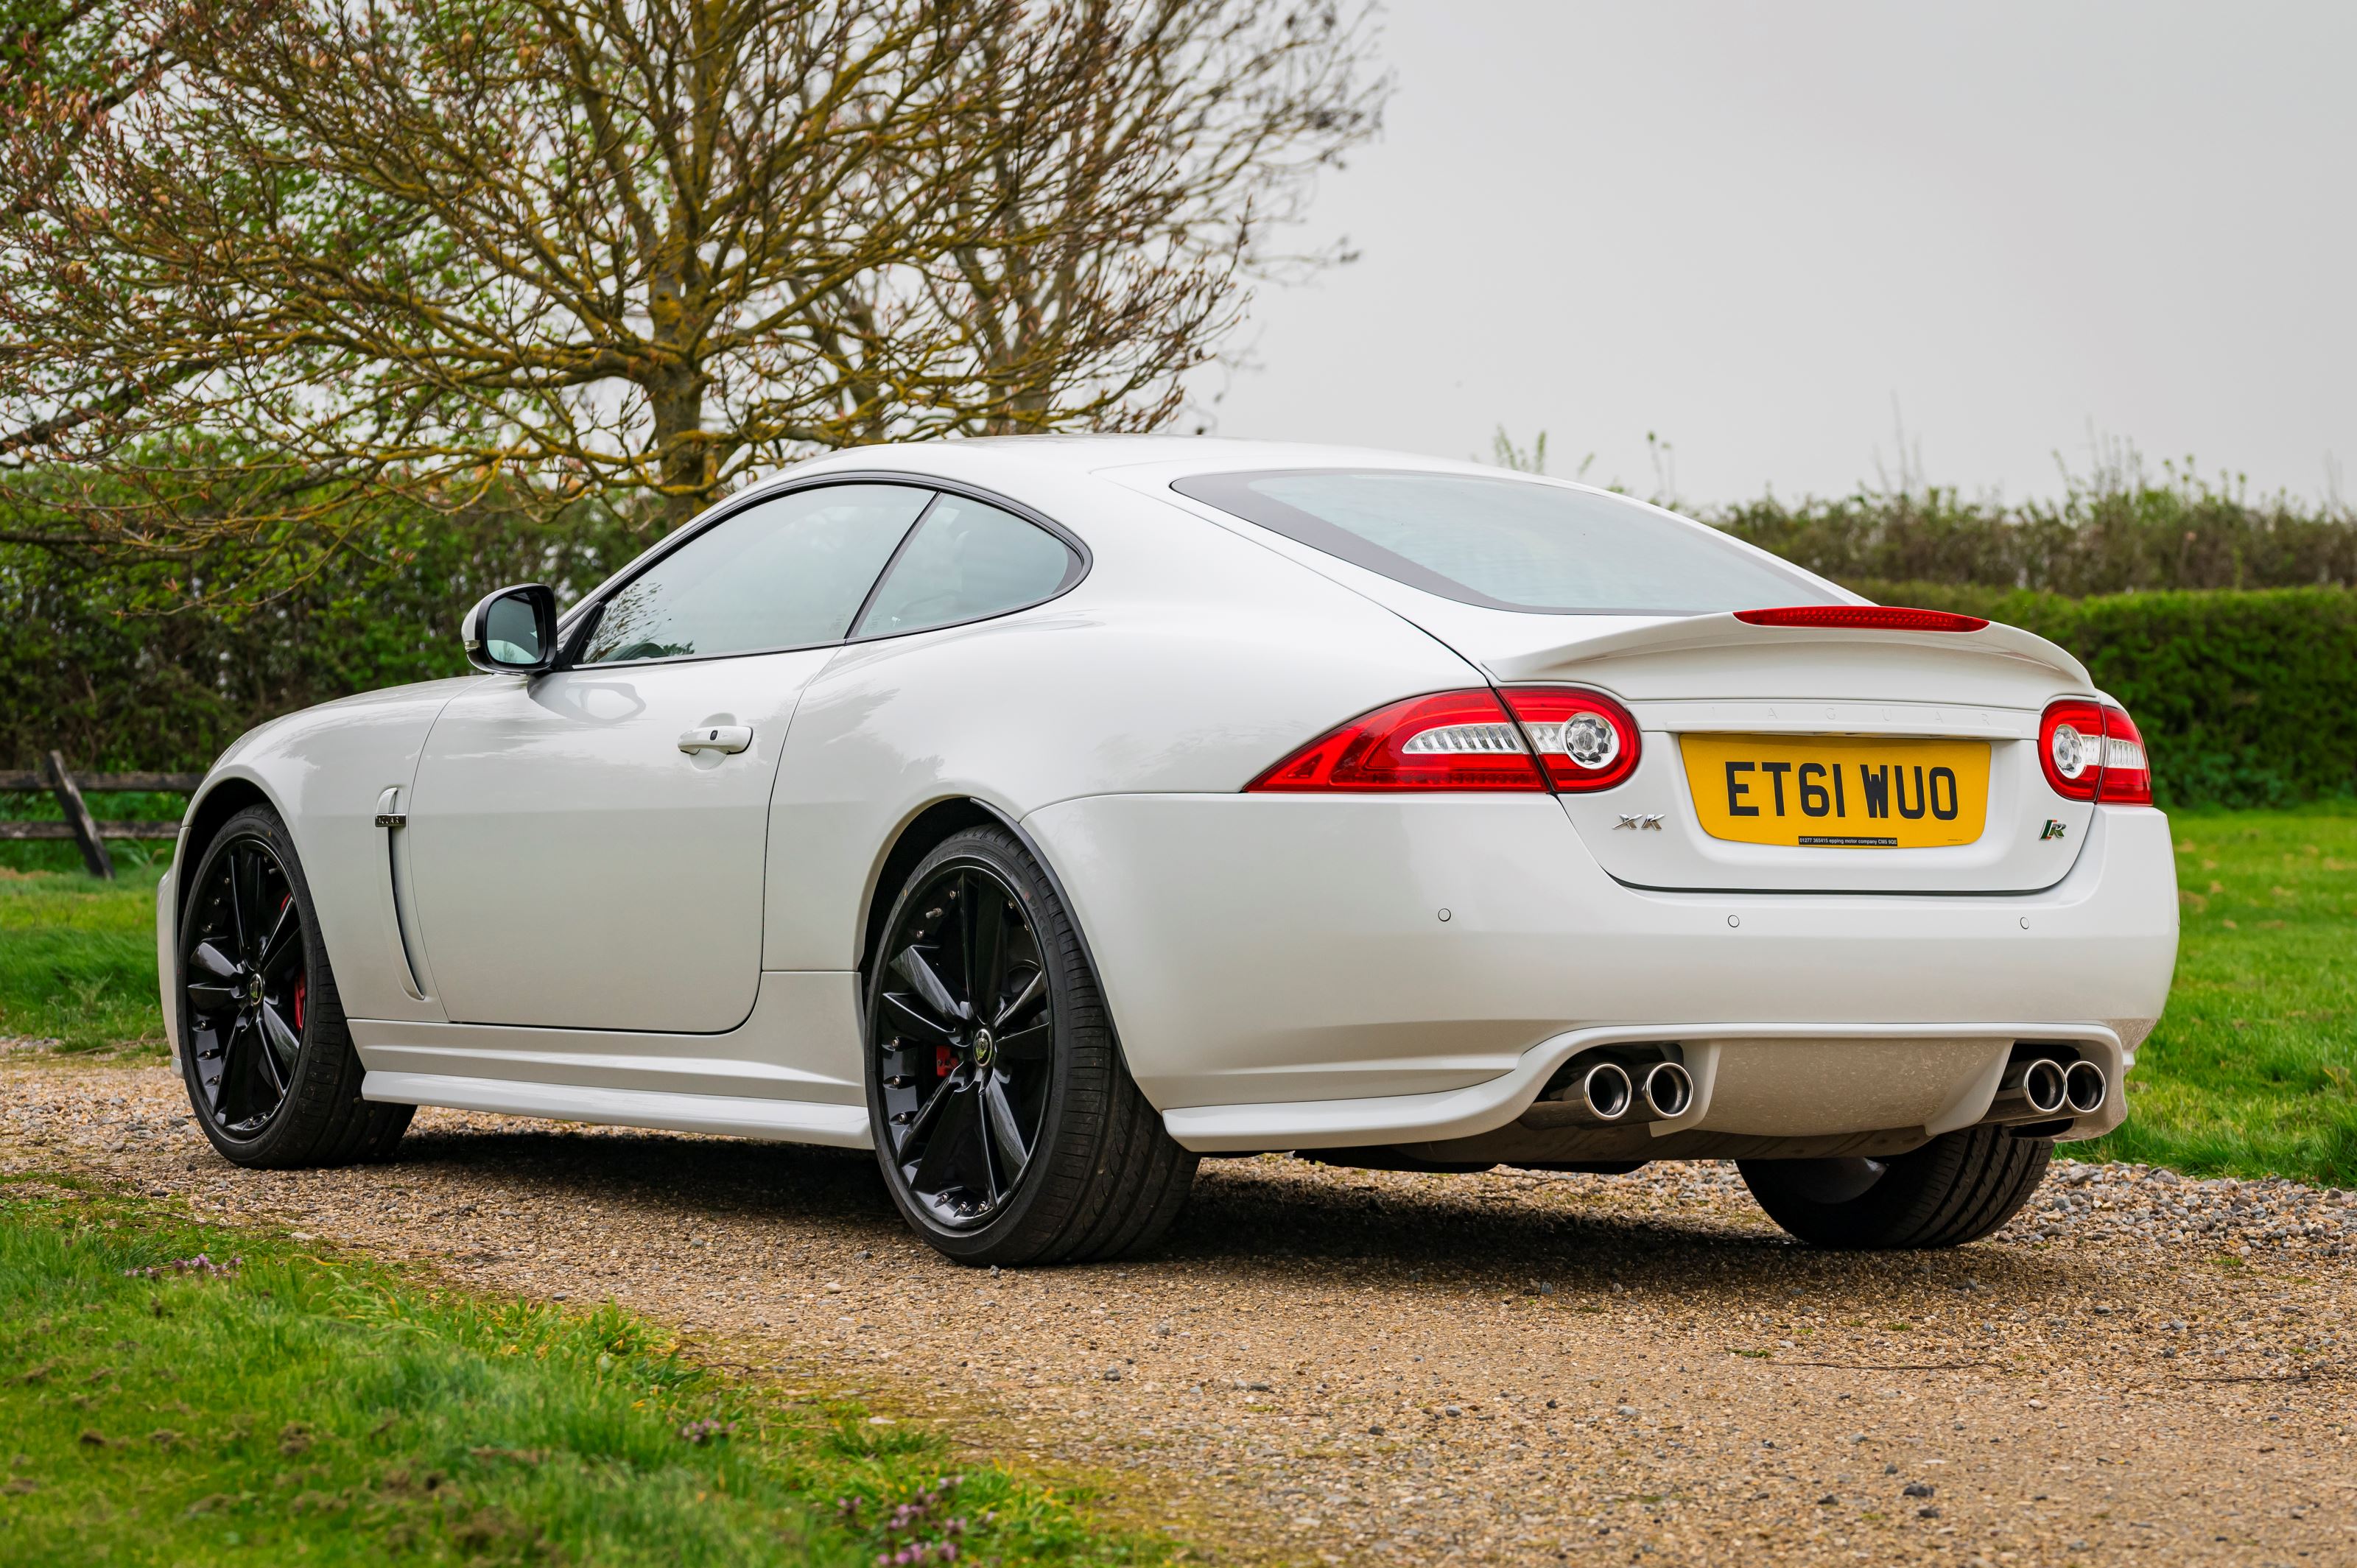 Jaguar xkr sc 5.0 litre  510 hp  coupe anyqpvcd4fyh83oydigyj